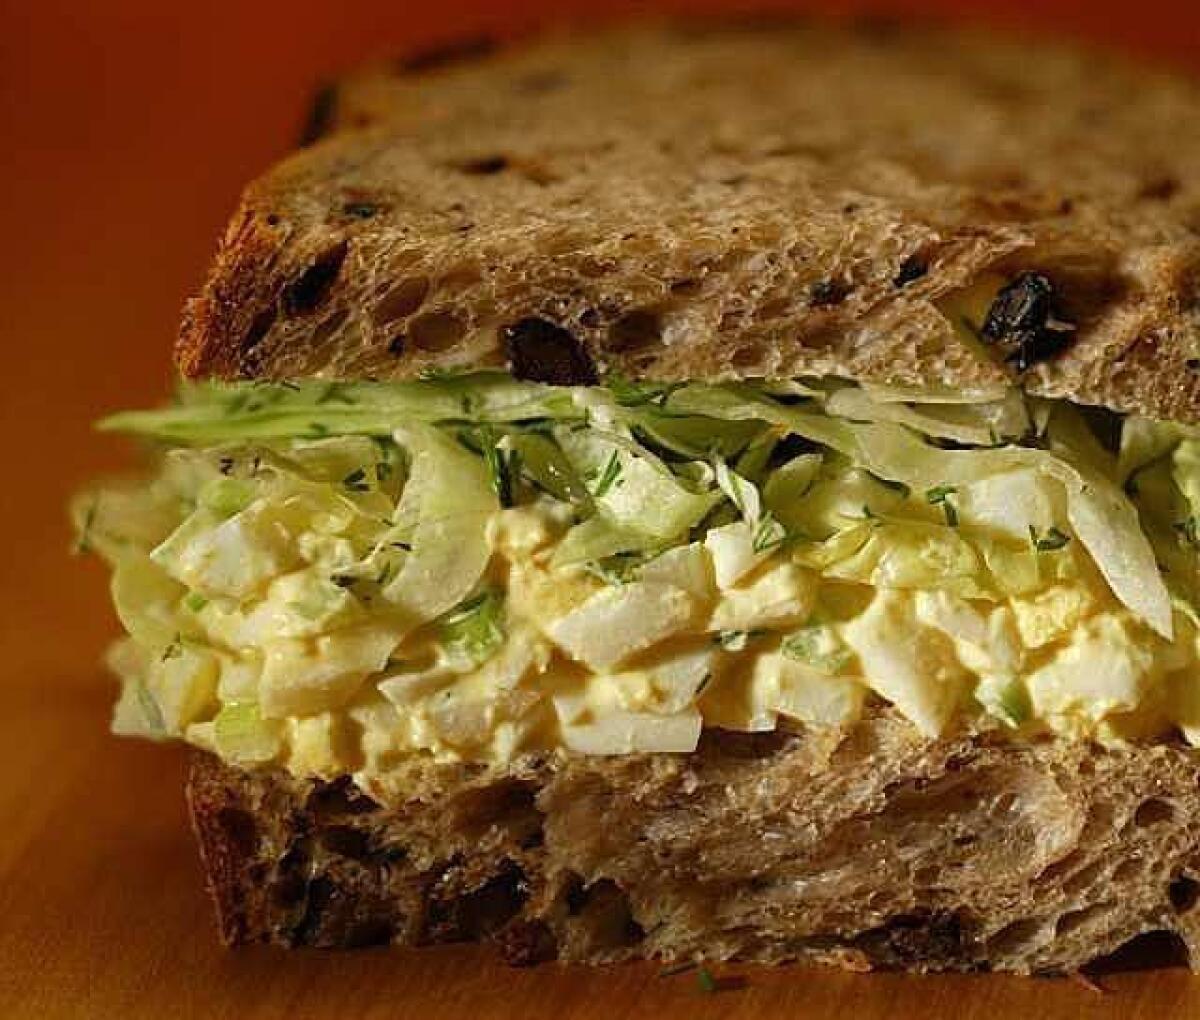 Egg salad sandwich? It's just one of the many ways to use up those leftover Easter eggs!